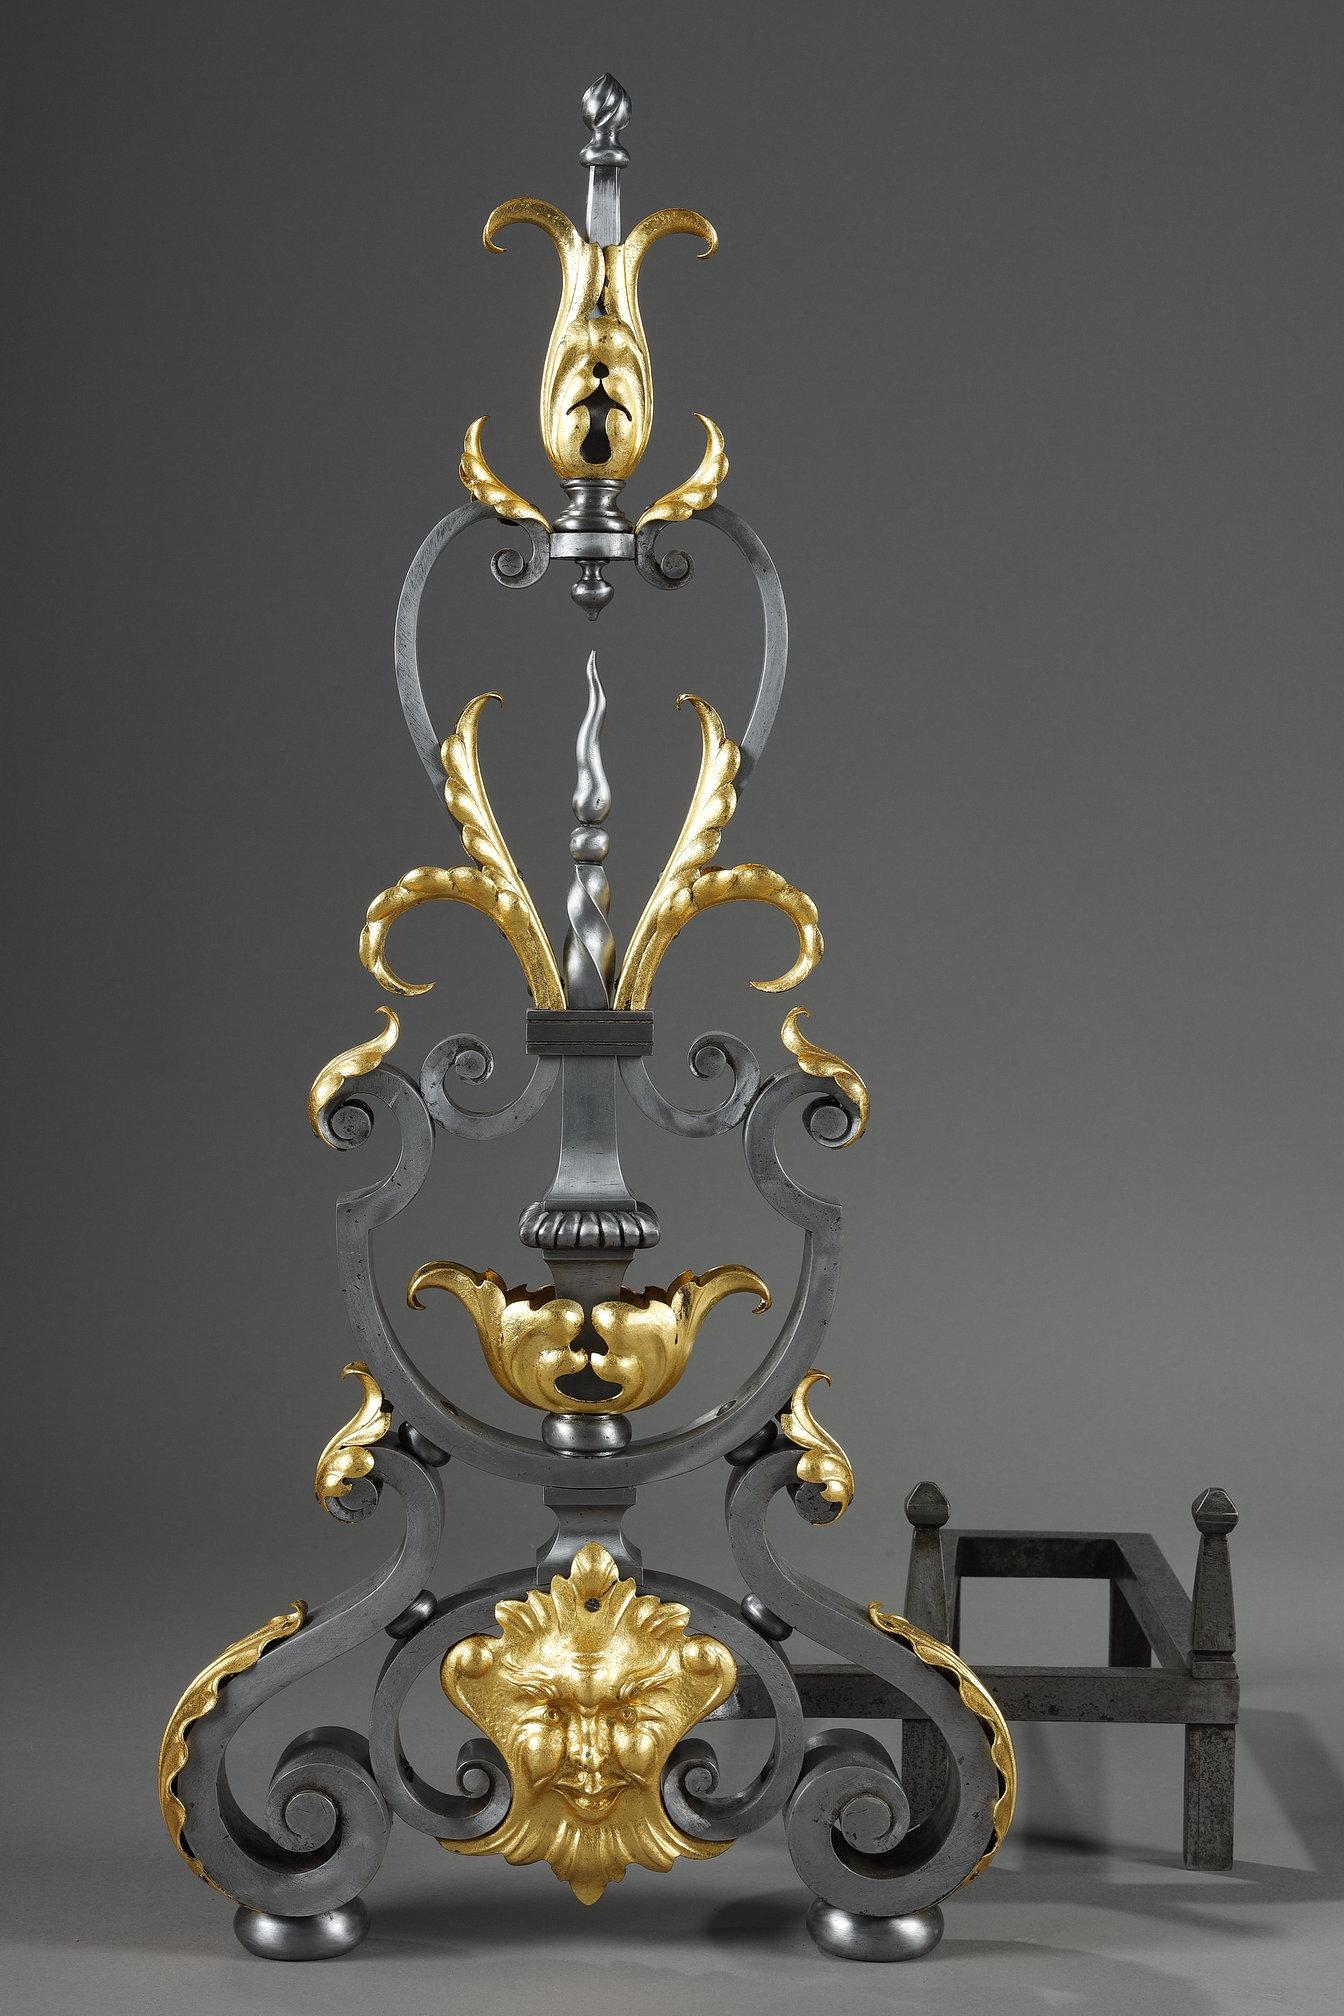 Pair of wrought iron landiers (andirons), late 19th century For Sale 1